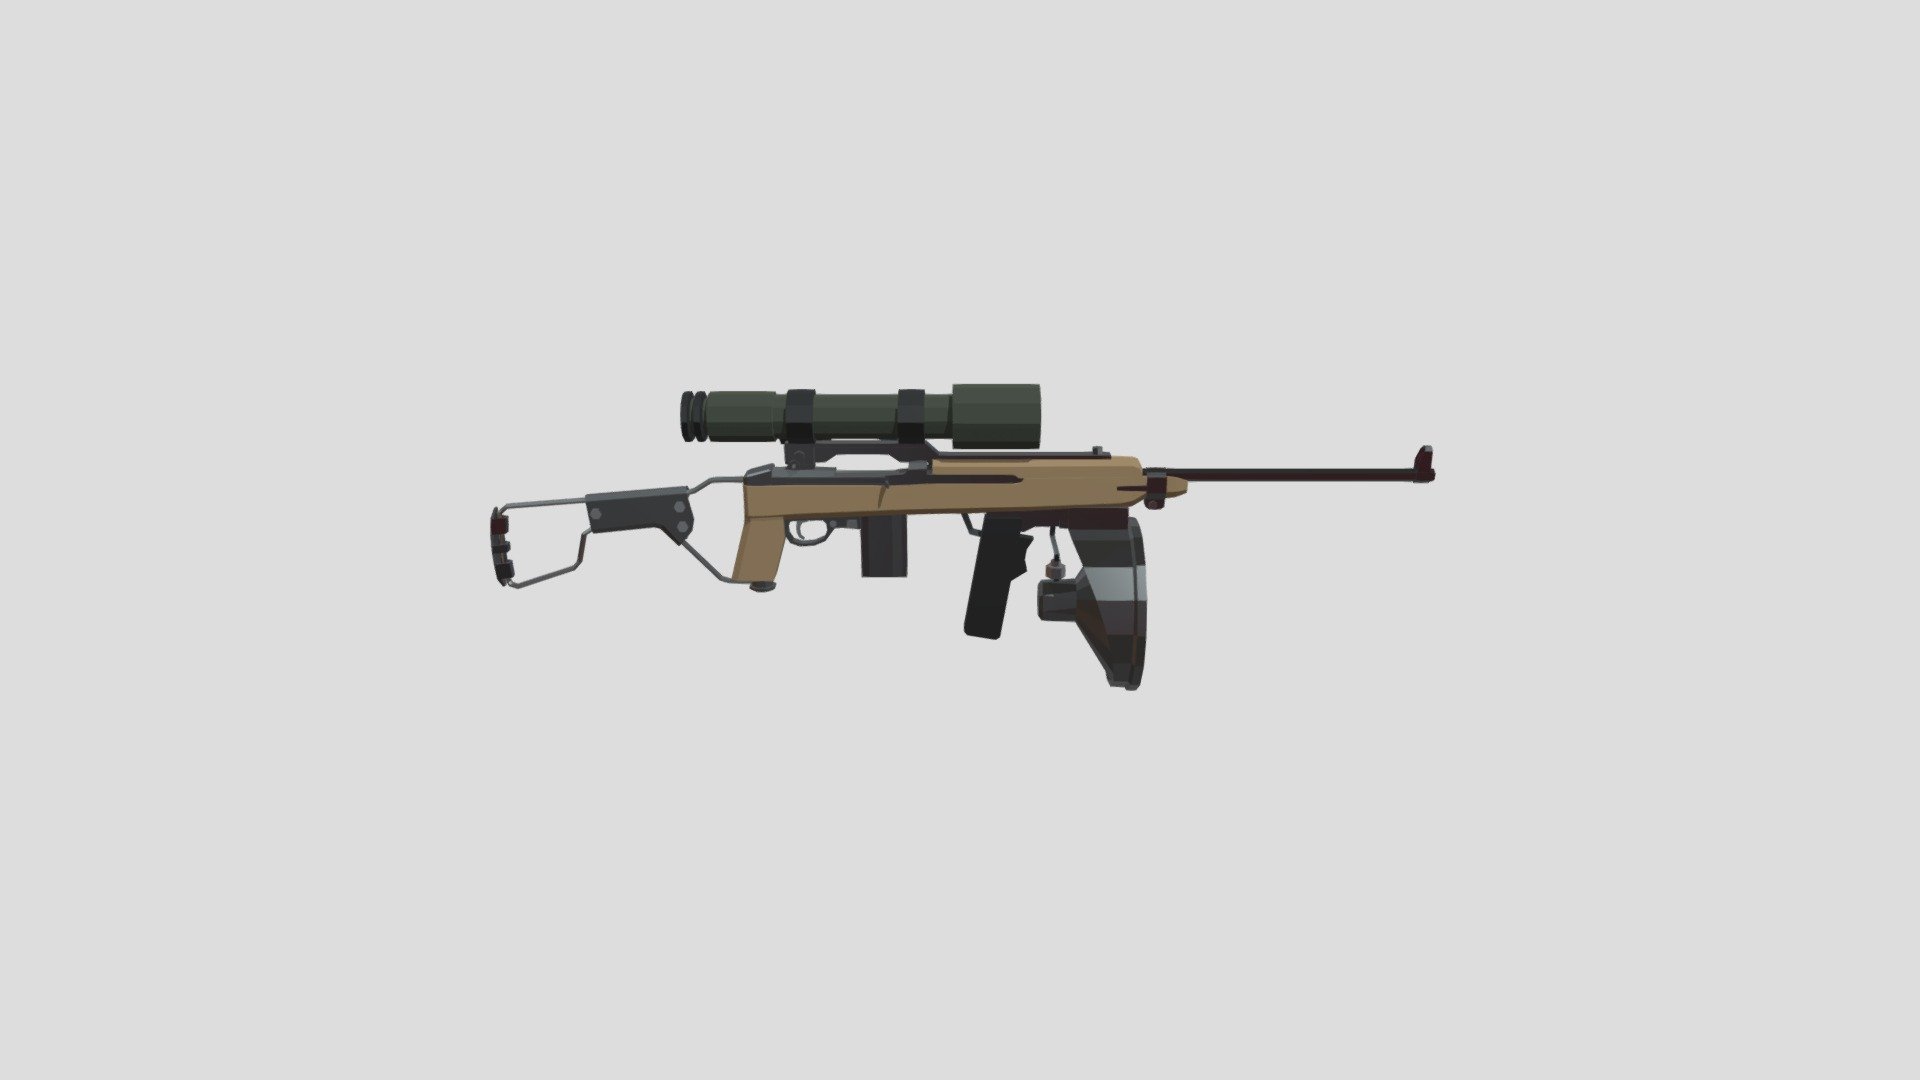 The M3 Carbine often referred to as T3 was a modified version of the M2 carbine chambered in 30. calibre rounds with a mounted infra-red sniper scope. The weapon was designed in 1943 and was originally designed to fight on the japanese front. This also was used during the korean war 3d model